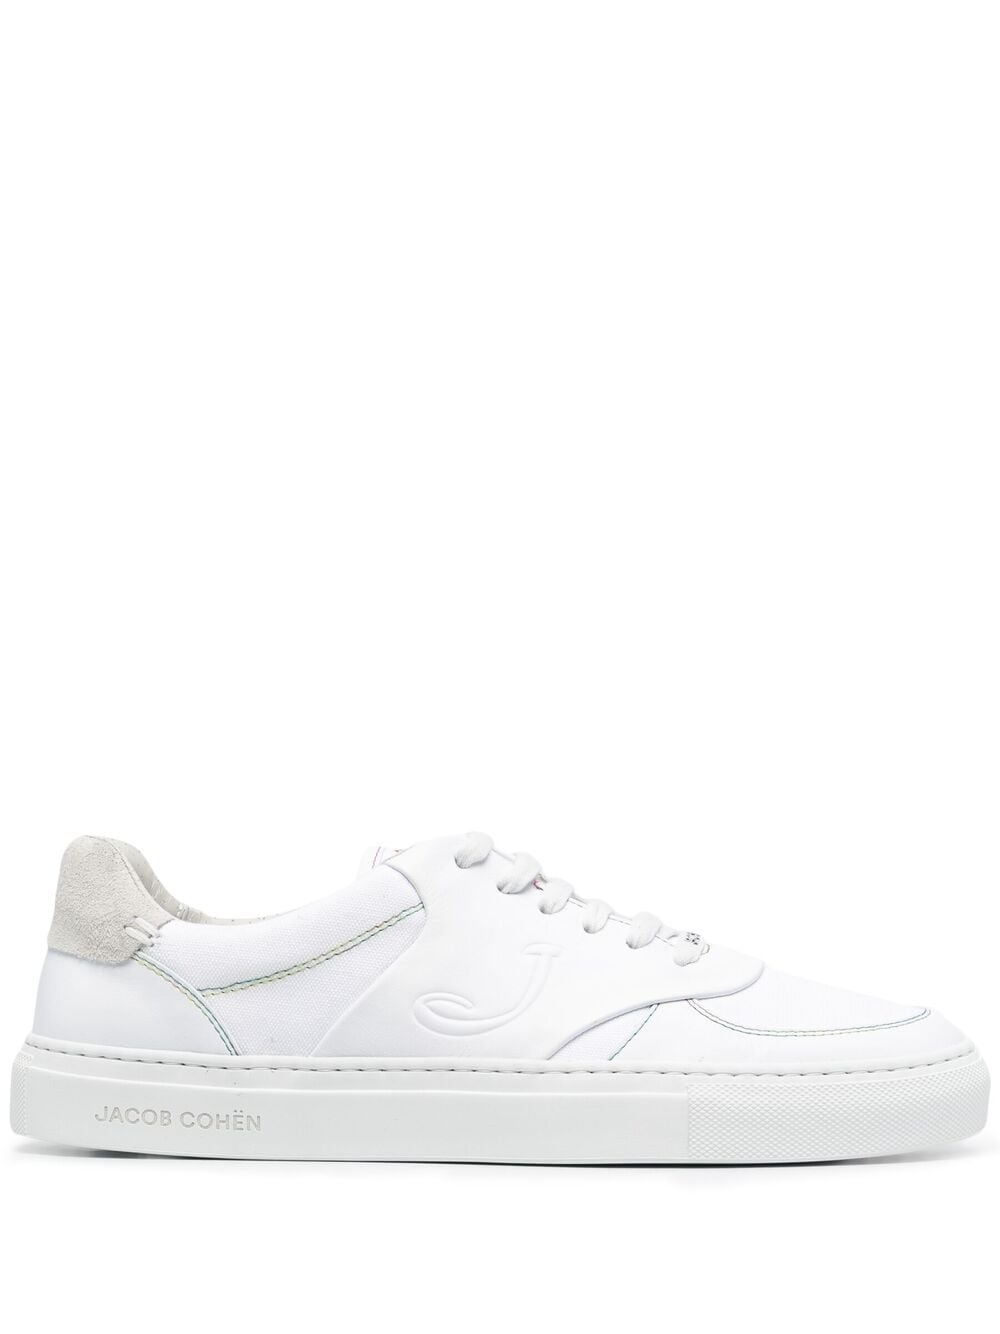 Jacob Cohen Embroidered-logo Tongue Sneakers In White | ModeSens